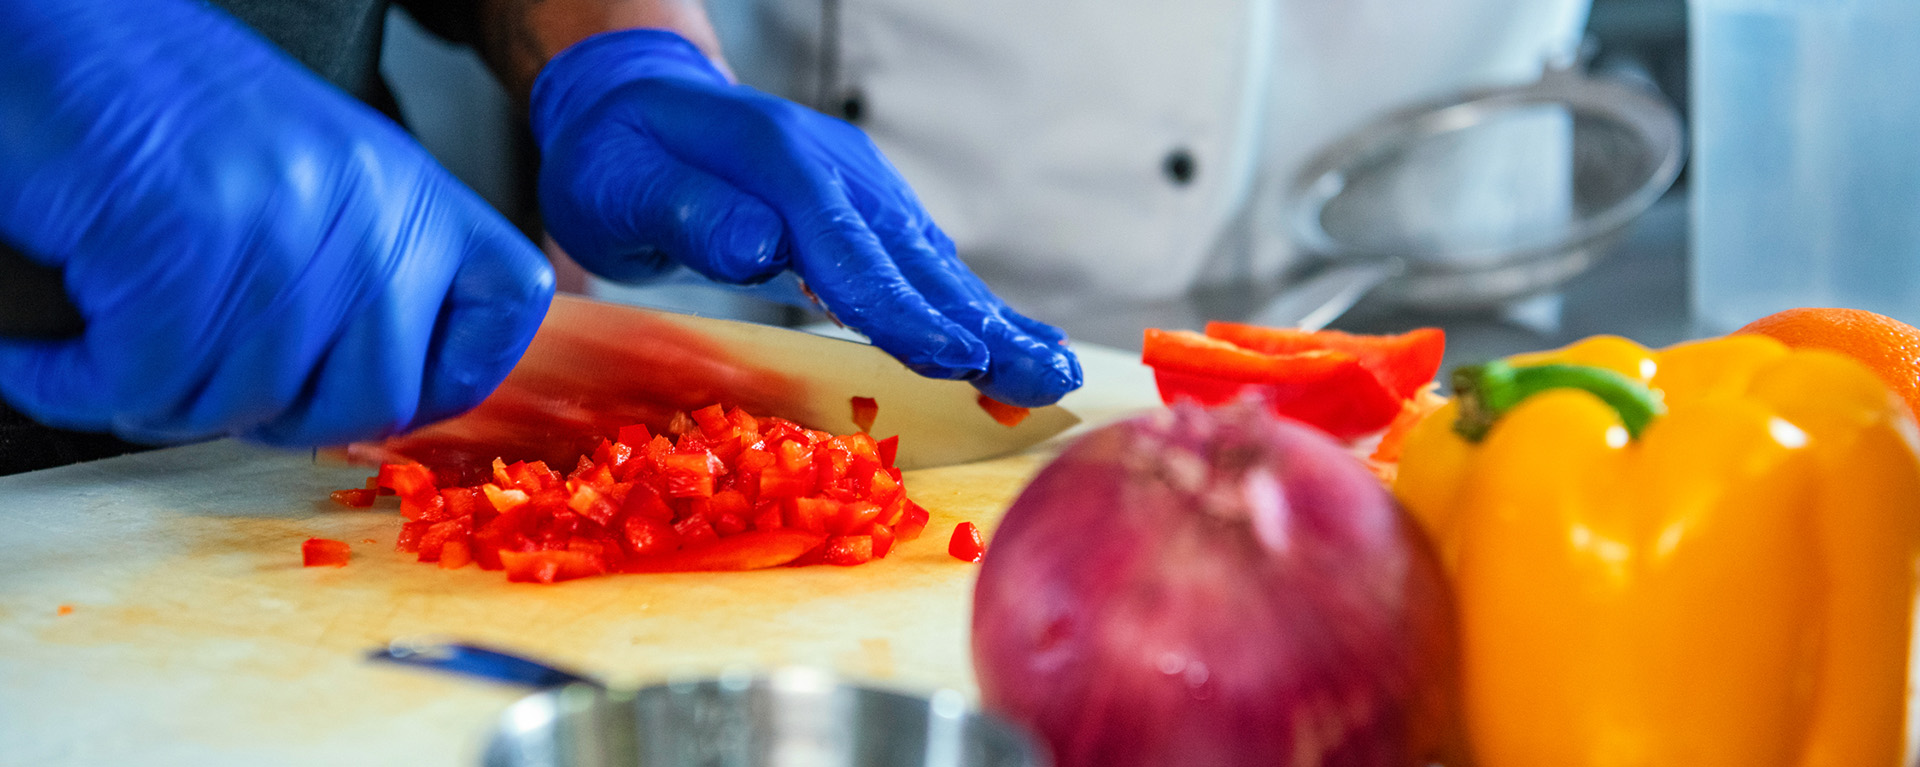 culinary student chopping vegetables